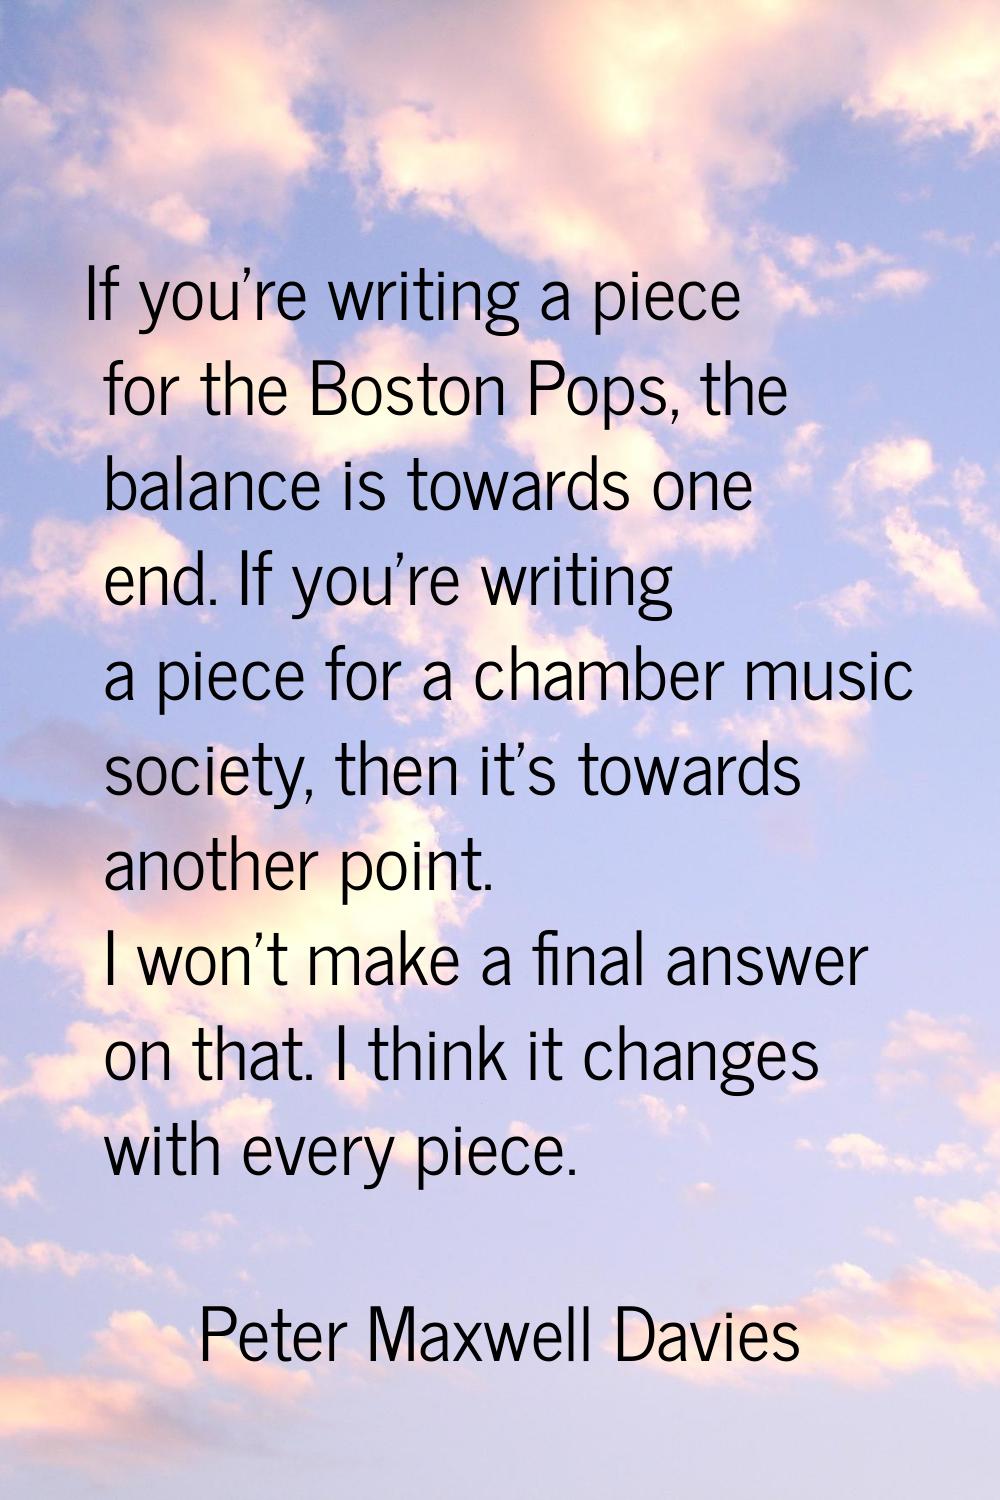 If you're writing a piece for the Boston Pops, the balance is towards one end. If you're writing a 